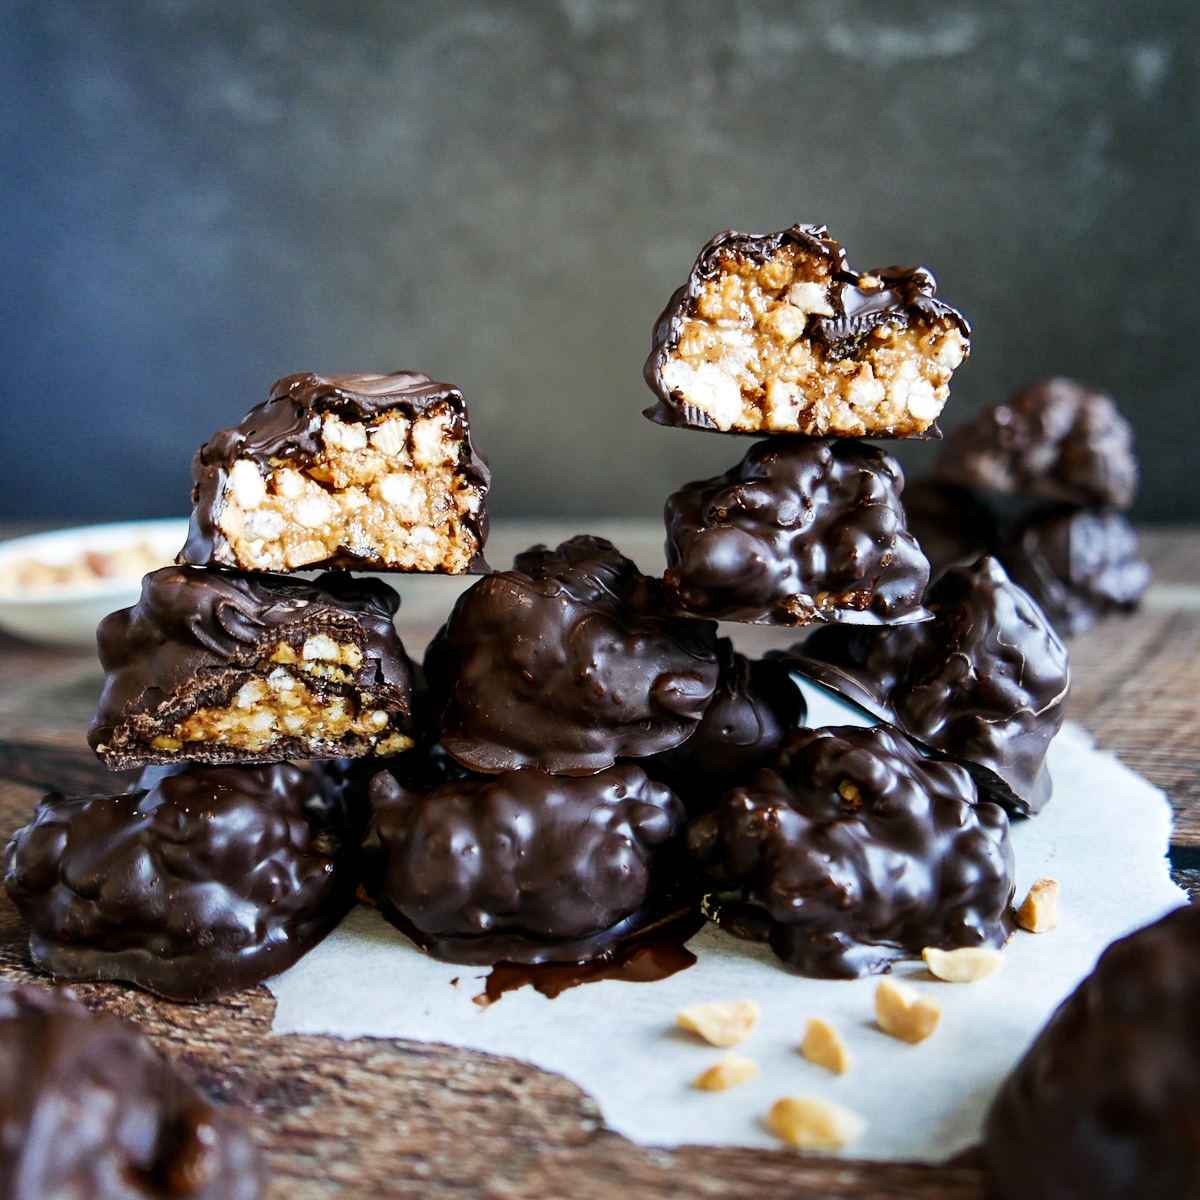 old fashioned peanut butter balls arranged in a pyramid shape with three balls cut open.